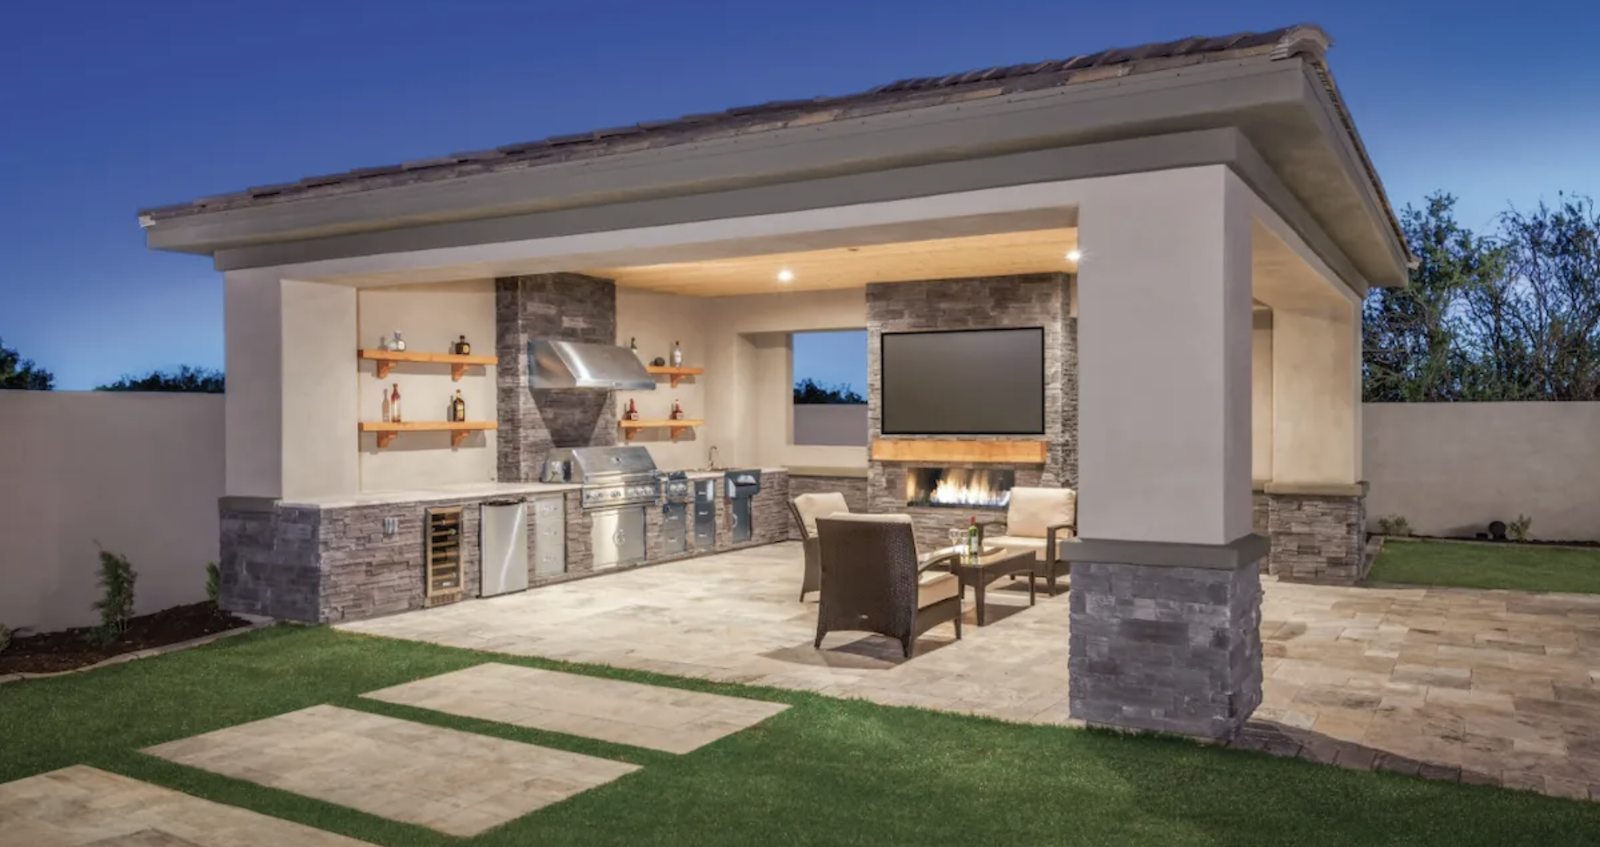 Popular features in home design include outdoor kitchens, like this one with a grill, fireplace, and comfortable seating